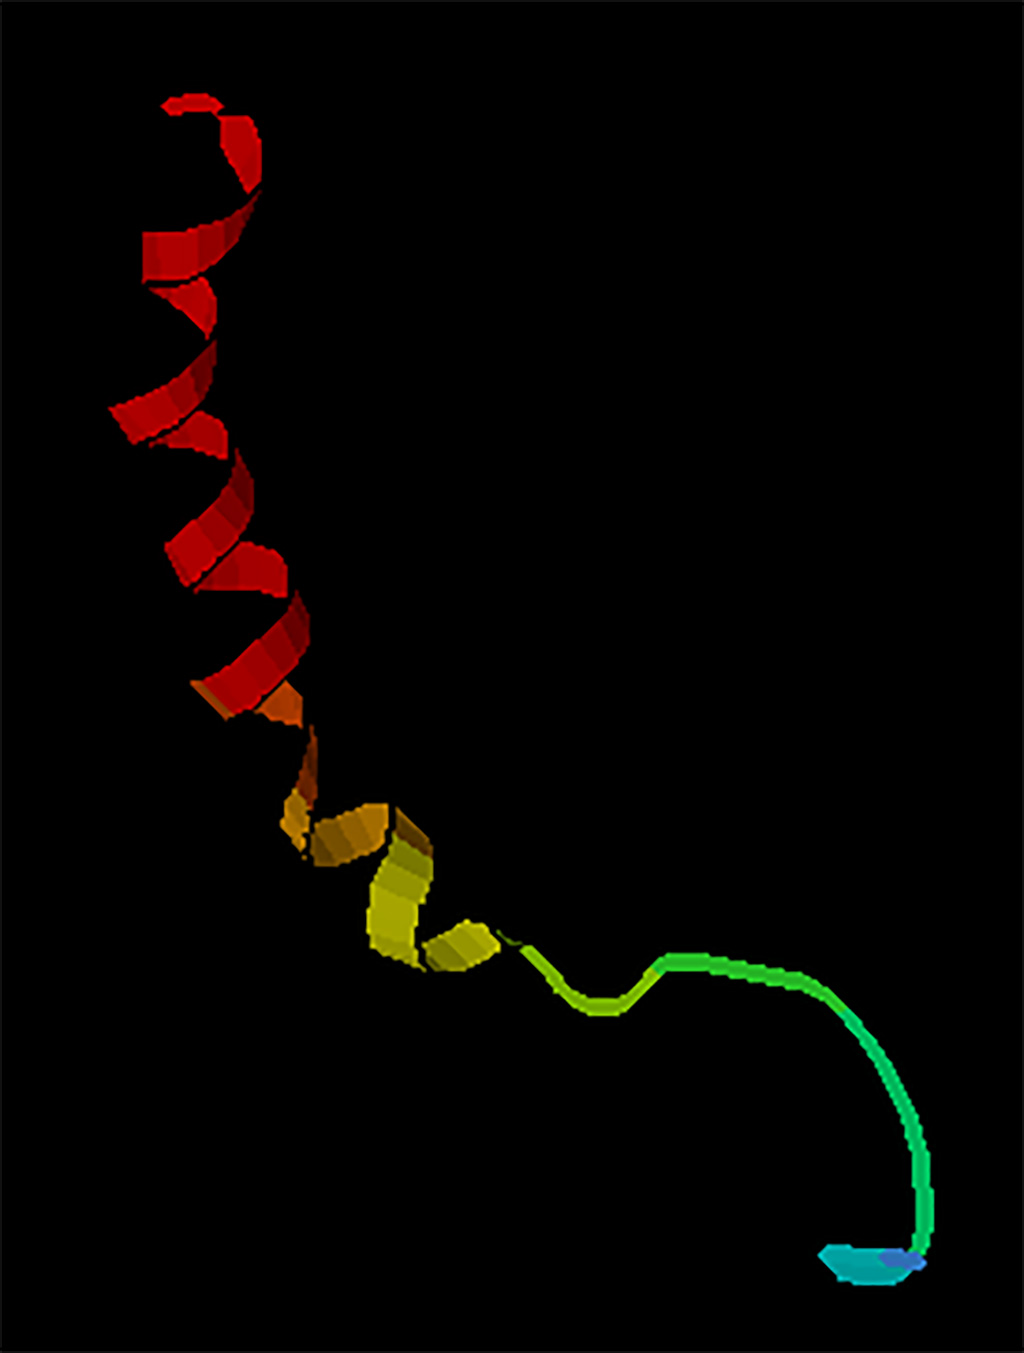 Image: NMR solution structure of neuropeptide Y (Photo courtesy of Wikimedia Commons)